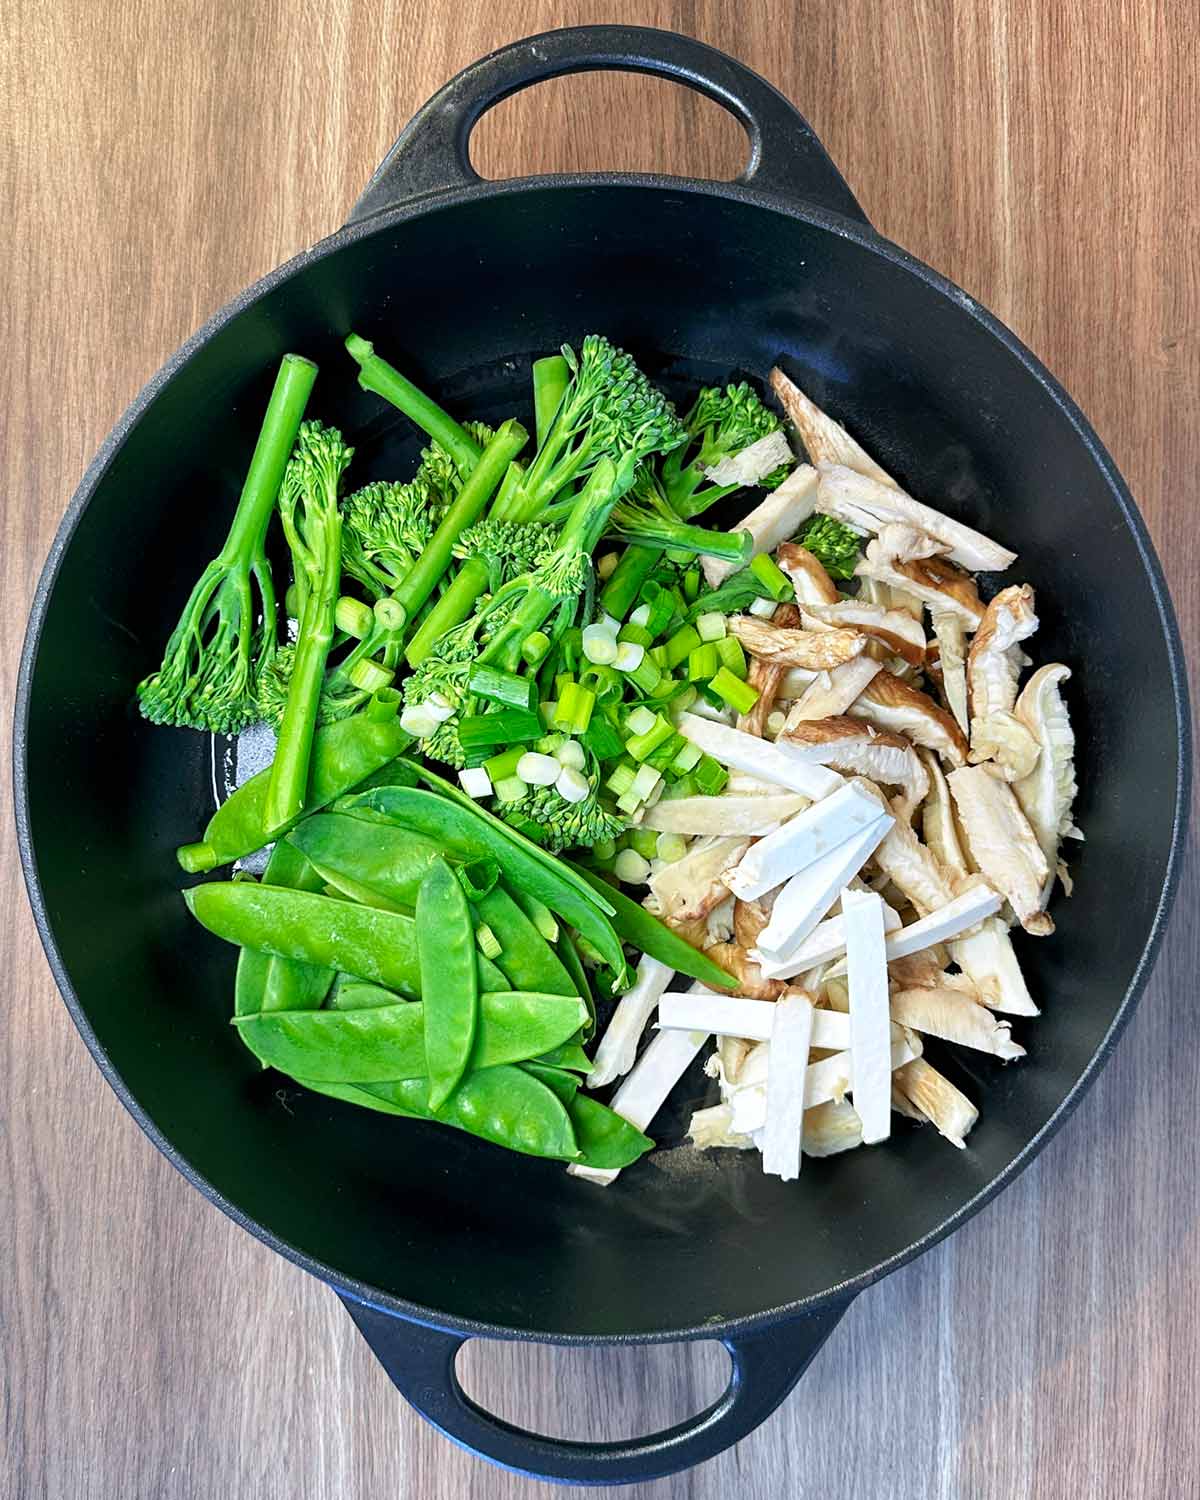 Mushrooms, broccoli, spring onions and mangetout frying in a pan.